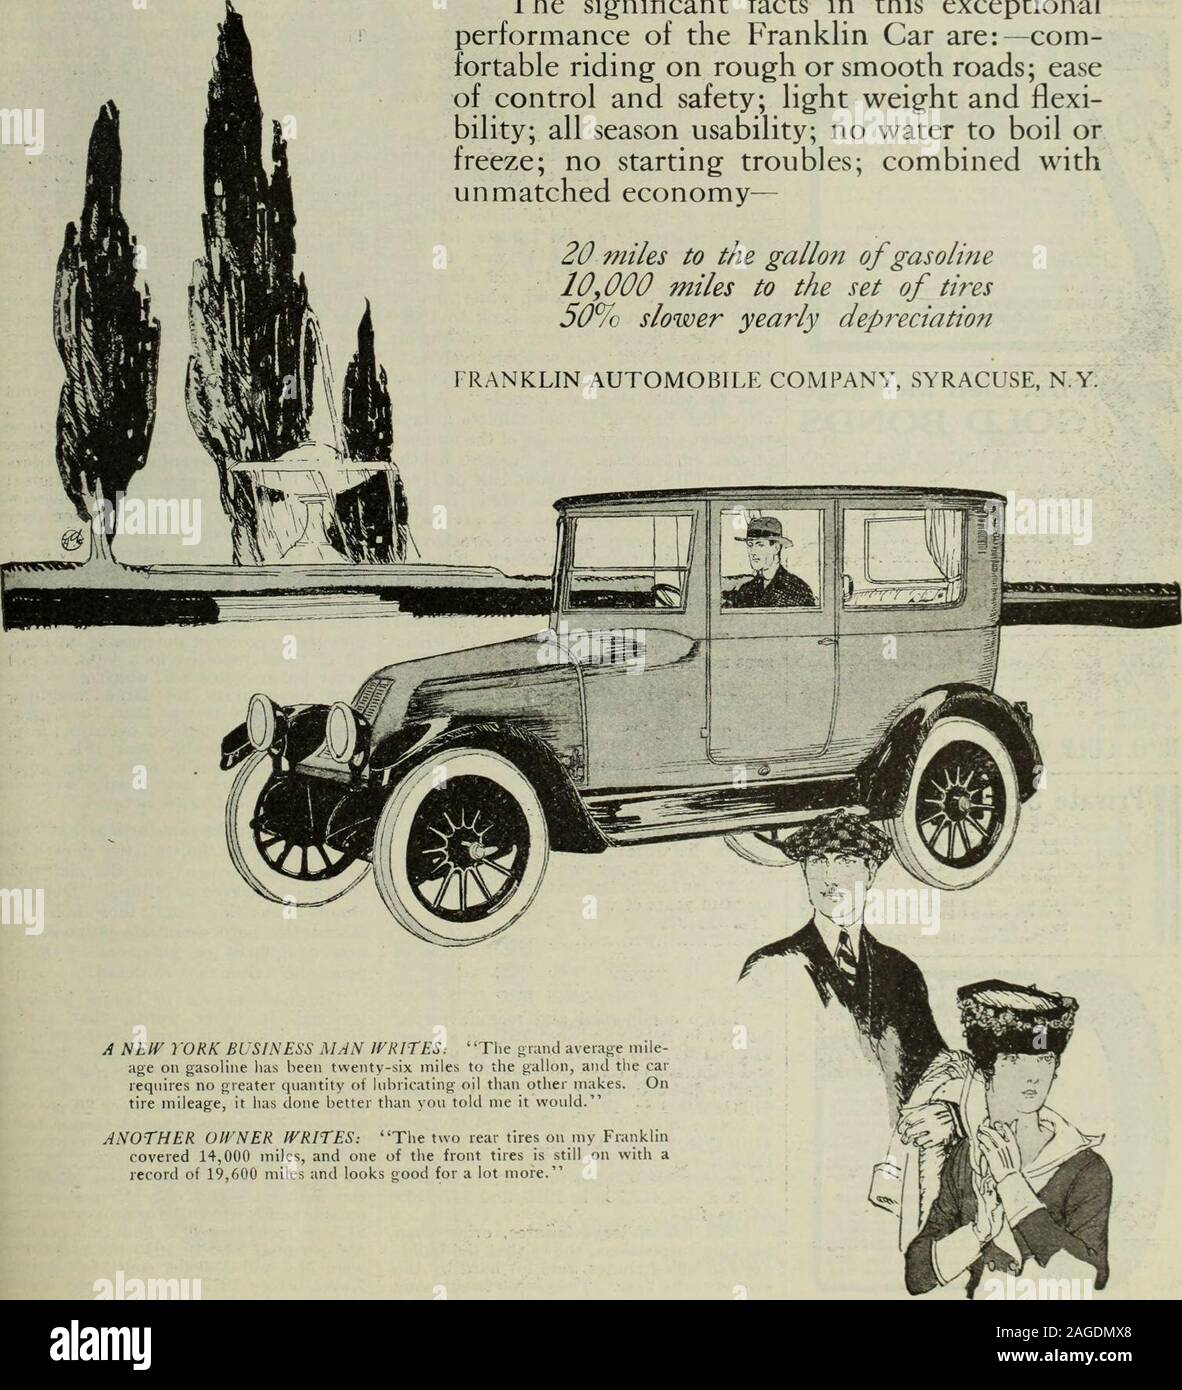 . The literary digest. ngjvged in the transporta-tion of troops and passengen«. Gov-ernment in(crcntion is under disius-sion, says a report from Wa-hinglon. The Literary Digest for March 22, 1919 143 THE FRANKLIN CAR THE exceptional performance of. theFranklin (^ar makes its market the fastestgrowing and most permanent in the fine car field. Motorists are today investigating perform-ance and what makes it possible. They arediscovering why the Franklin Car delivers themotoring satisfaction they have been seeking,while a change of make in the past has onlyexchanged familiar troubles. The signif Stock Photo